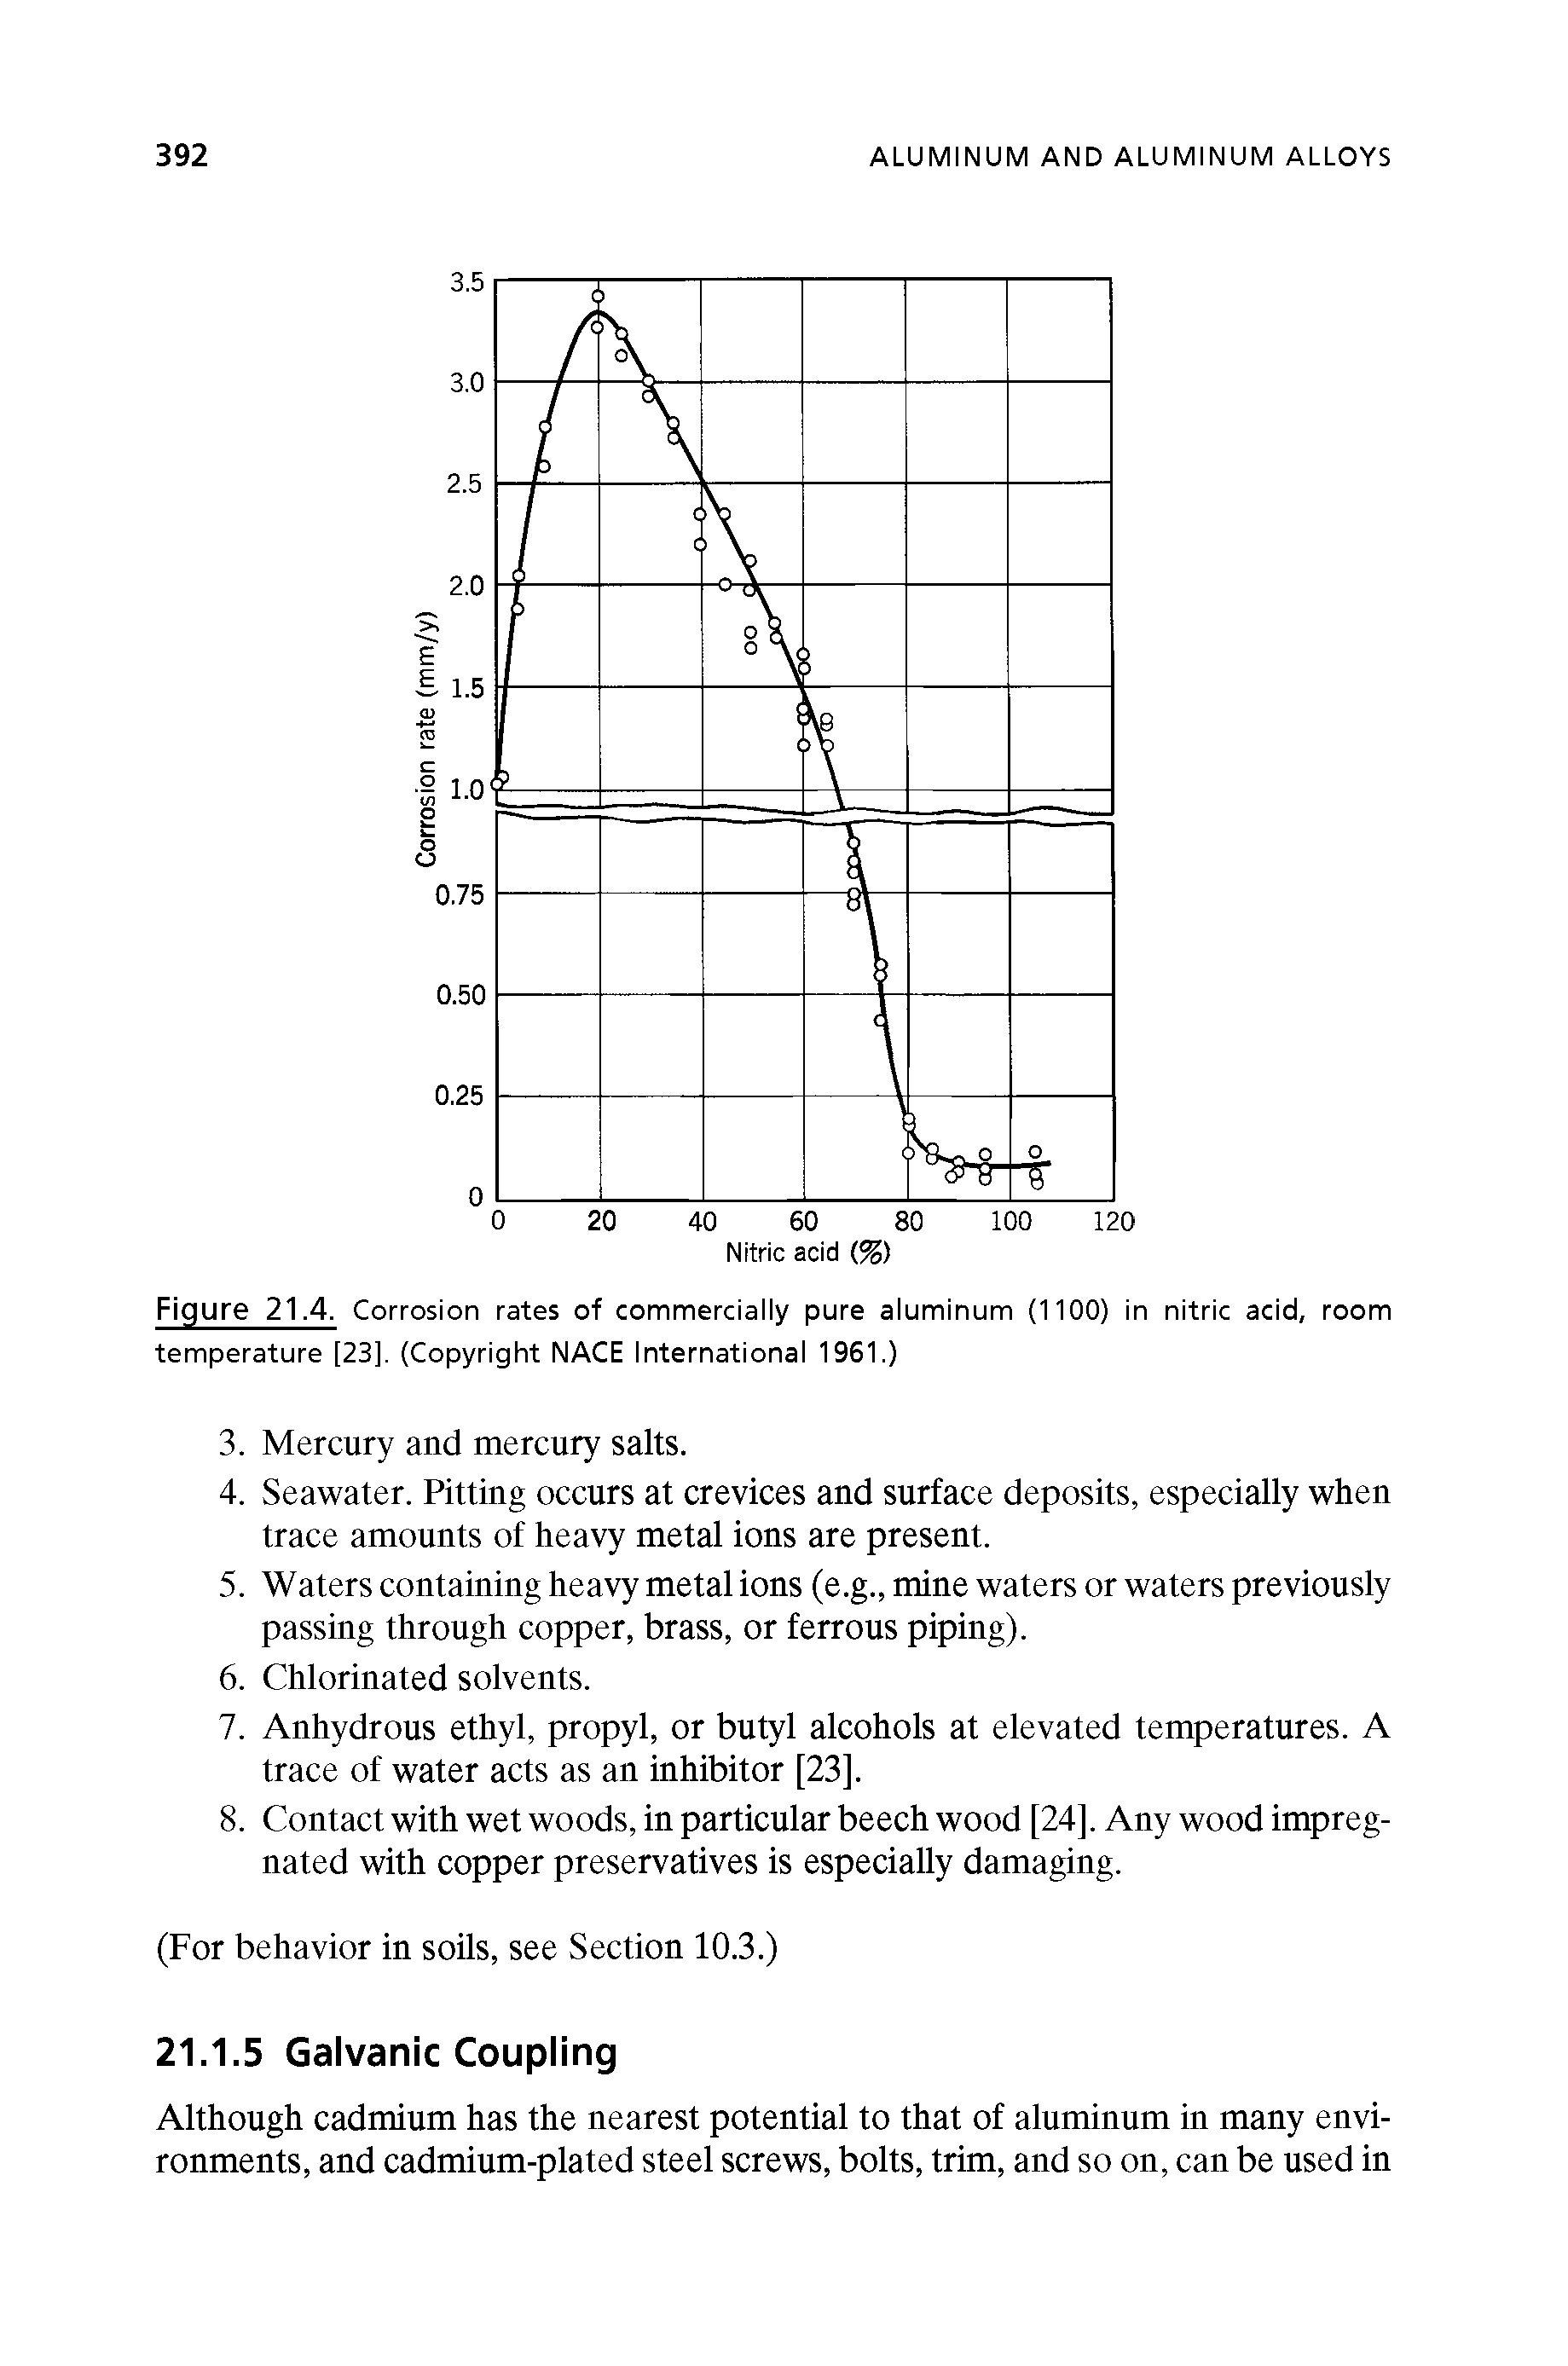 Figure 21.4. Corrosion rates of commercially pure aluminum (1100) in nitric acid, room temperature [23], (Copyright NACE International 1961.)...